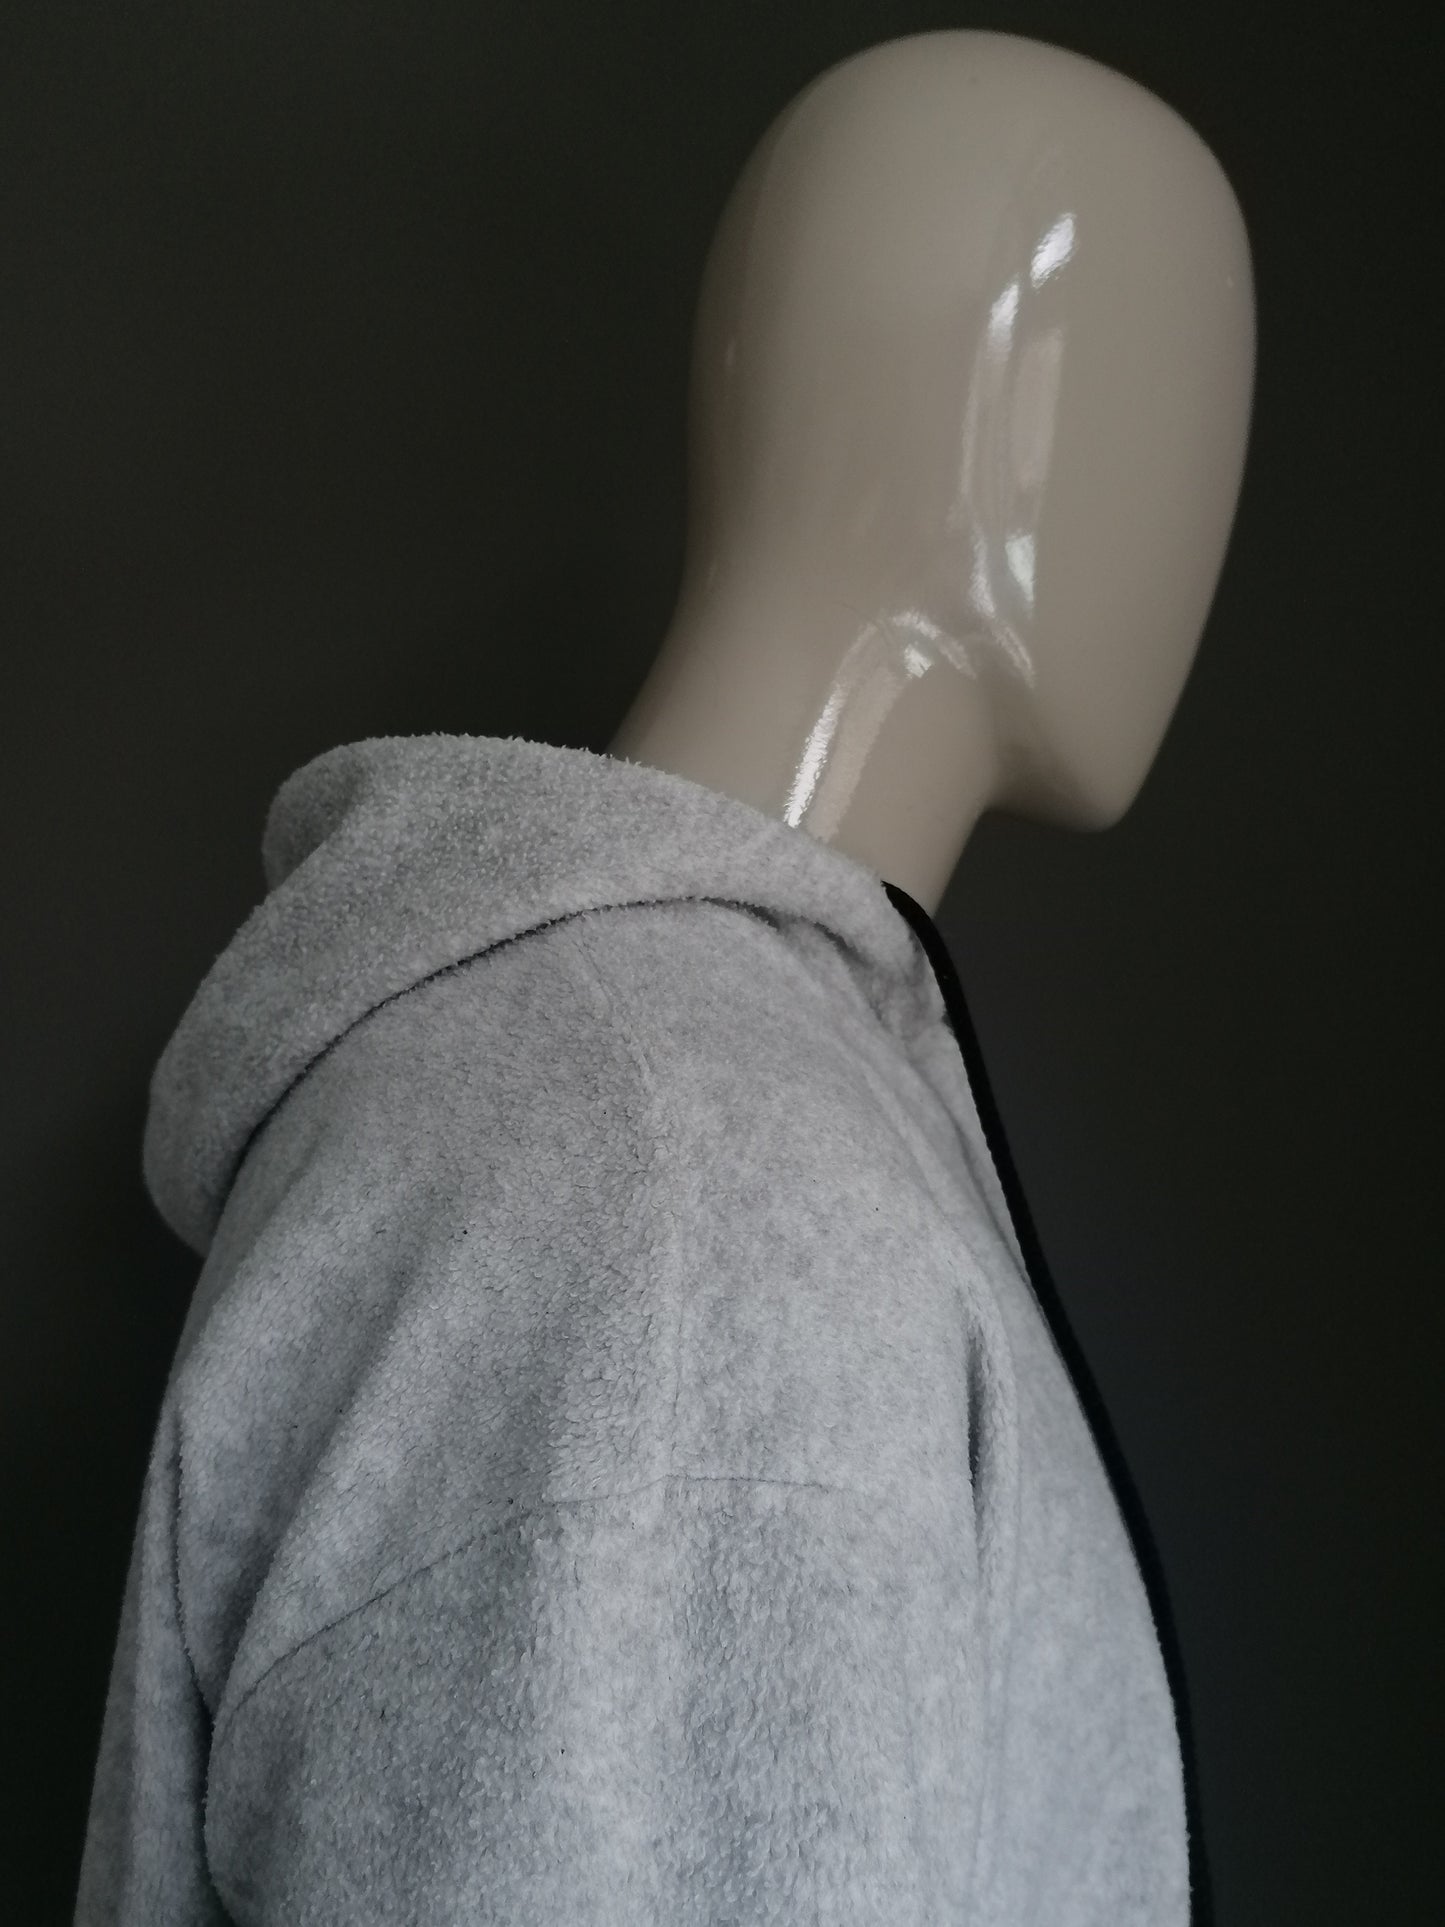 Circuit de Spa / Francorchamps F1 Fleece cardigan with hood. Gray black colored. Size M.